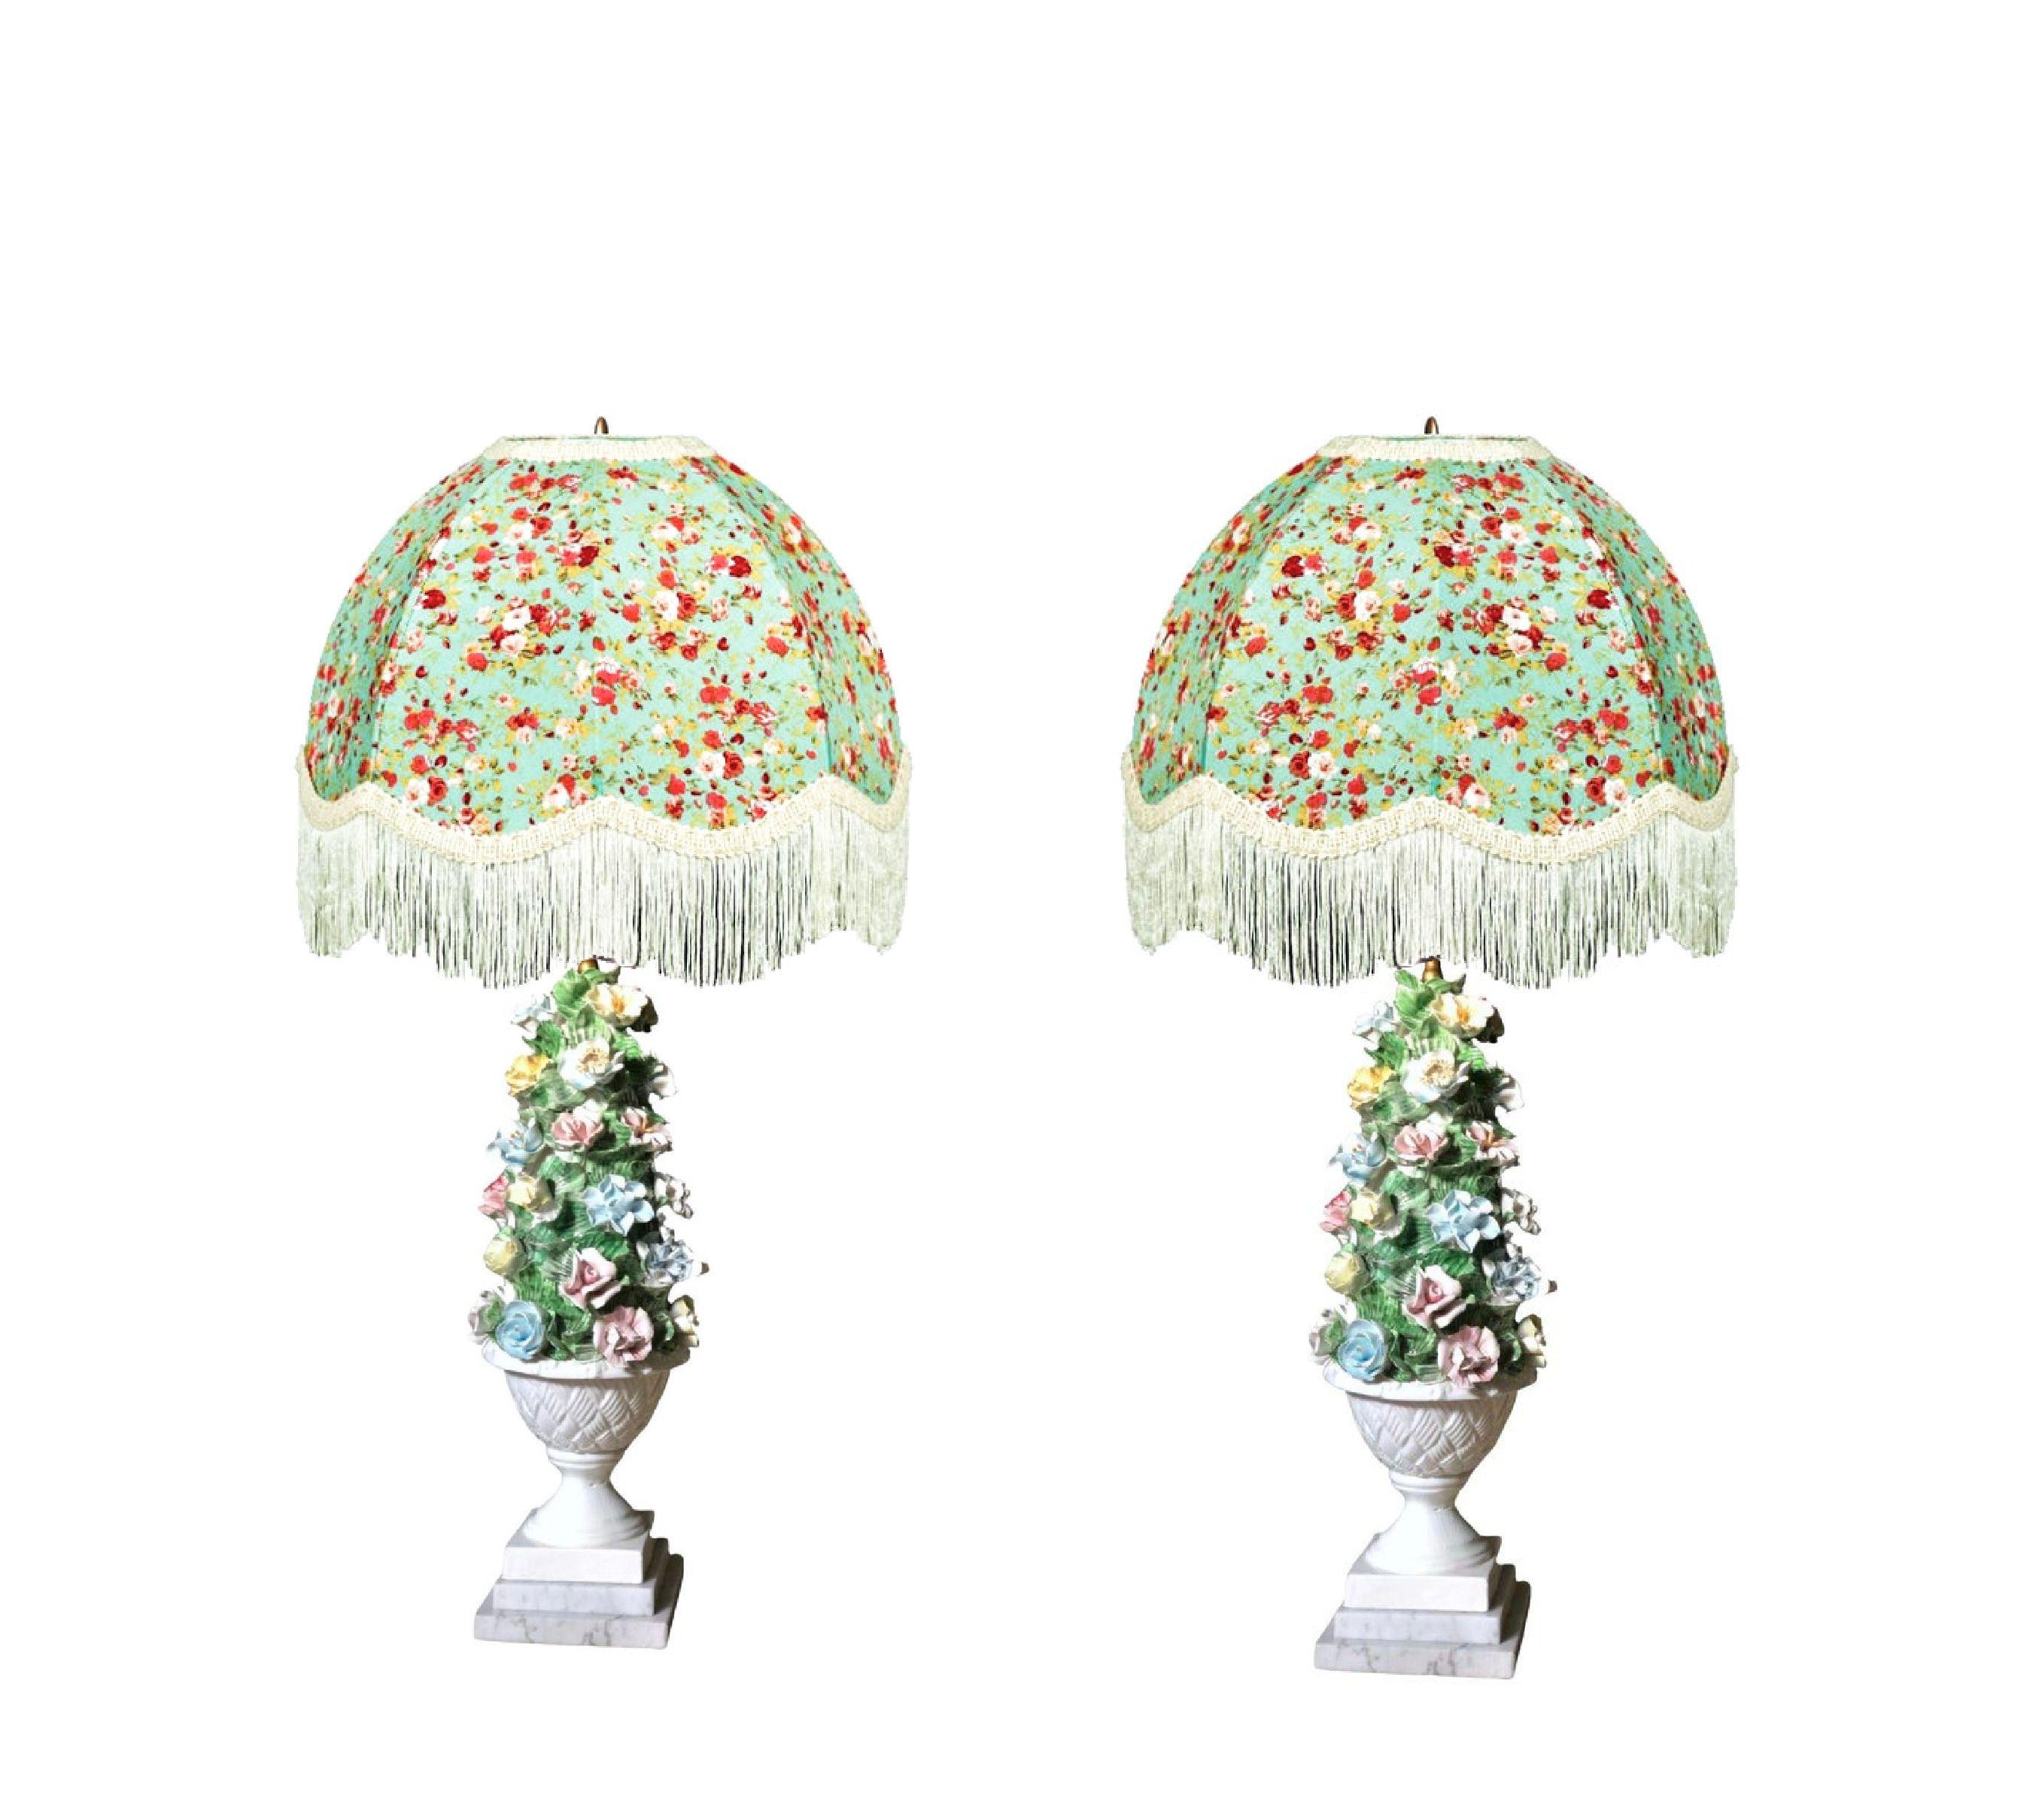 Midcentury Italian Modern Capodimonte Porcelain Topiary Floral Table Lamps For Sale